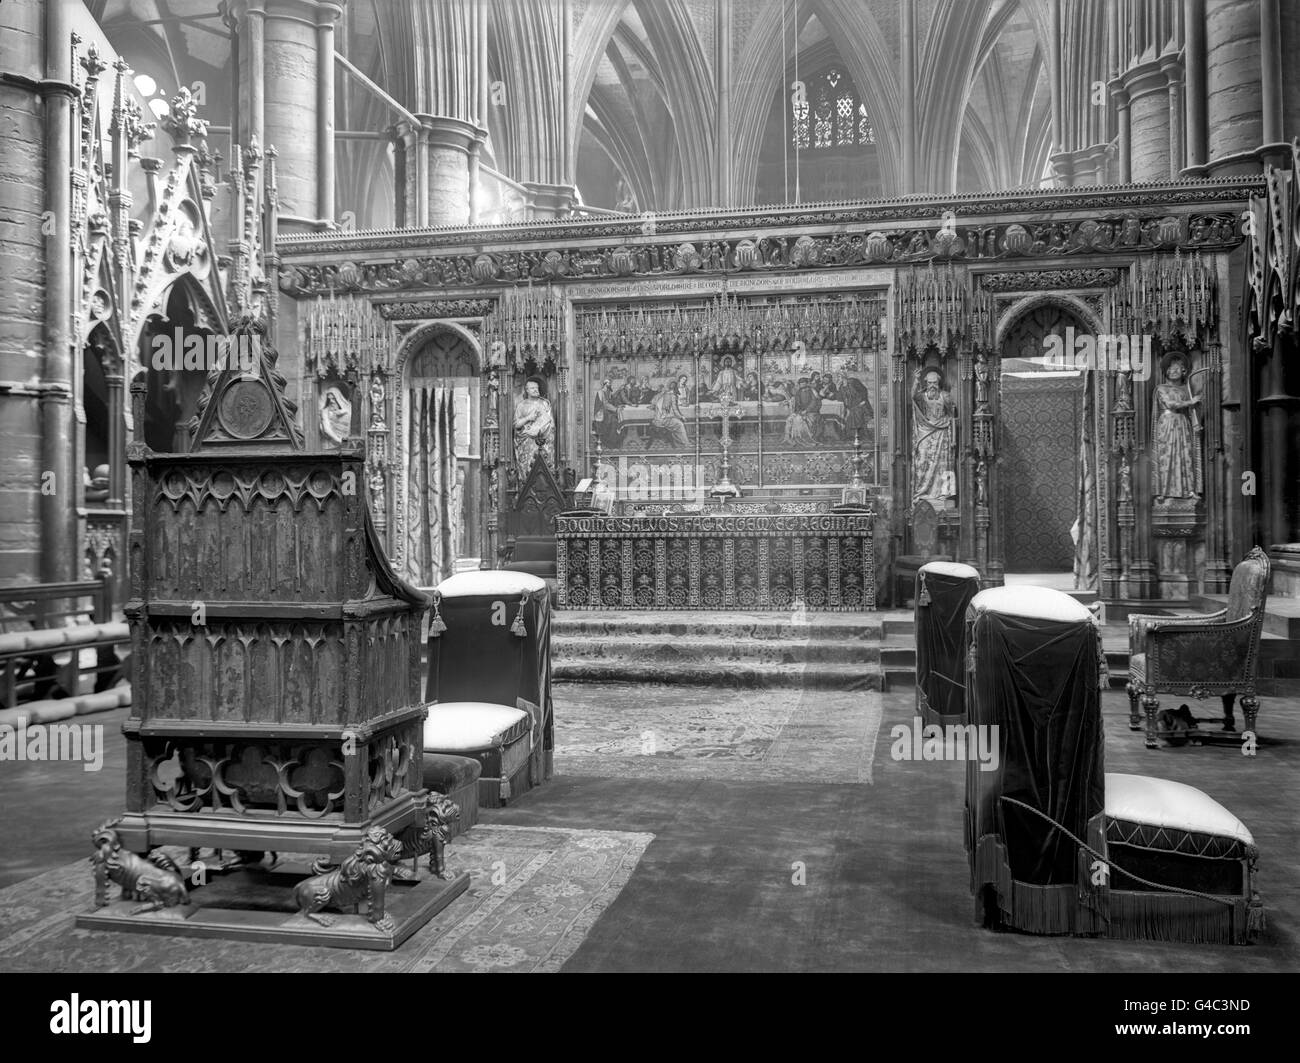 King Edward's Chair, or the Coronation Chair, the throne on which the British monarch sits for the coronation at the High Altar in Westminster Abbey. It was commissioned in 1296 by King Edward I to contain the coronation stone of Scotland, known as the Stone of Scone, which he had captured from the Scots Stock Photo